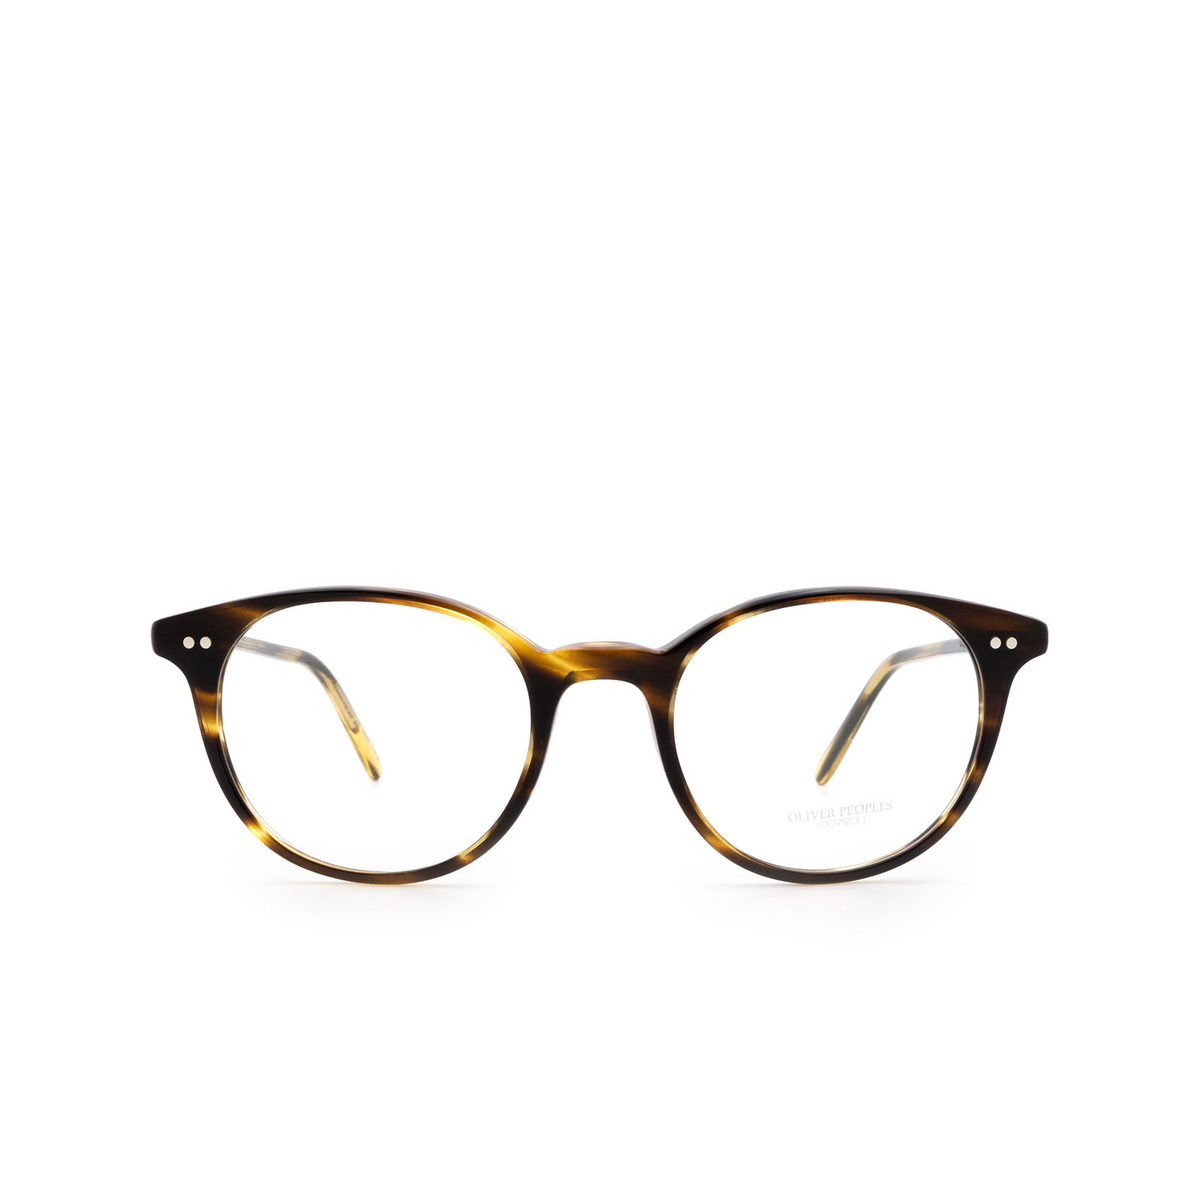 Oliver Peoples MIKETT Eyeglasses 1003 Cocobolo - front view